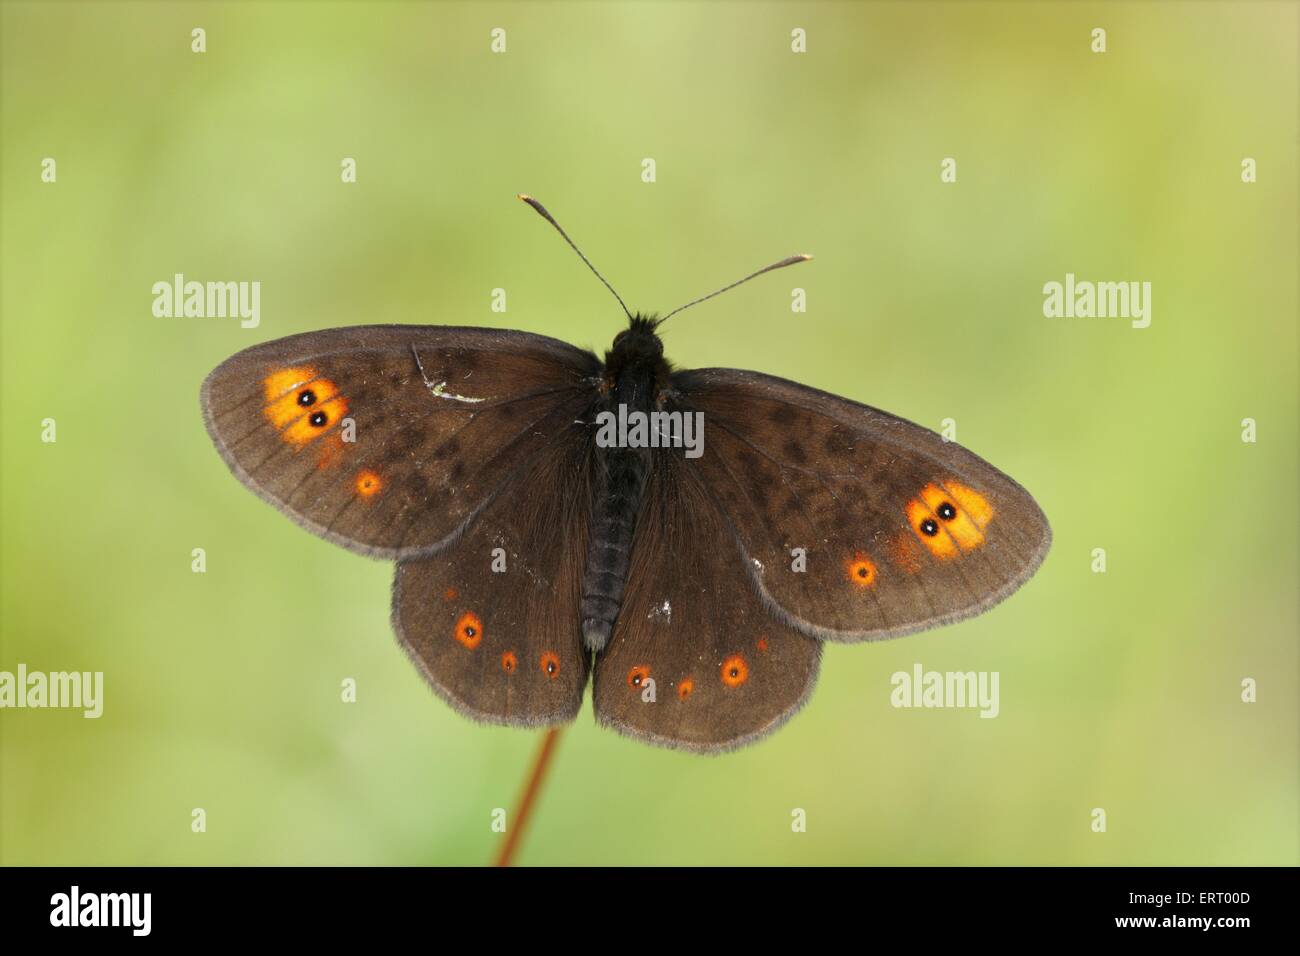 Brush-footed butterfly Foto de stock